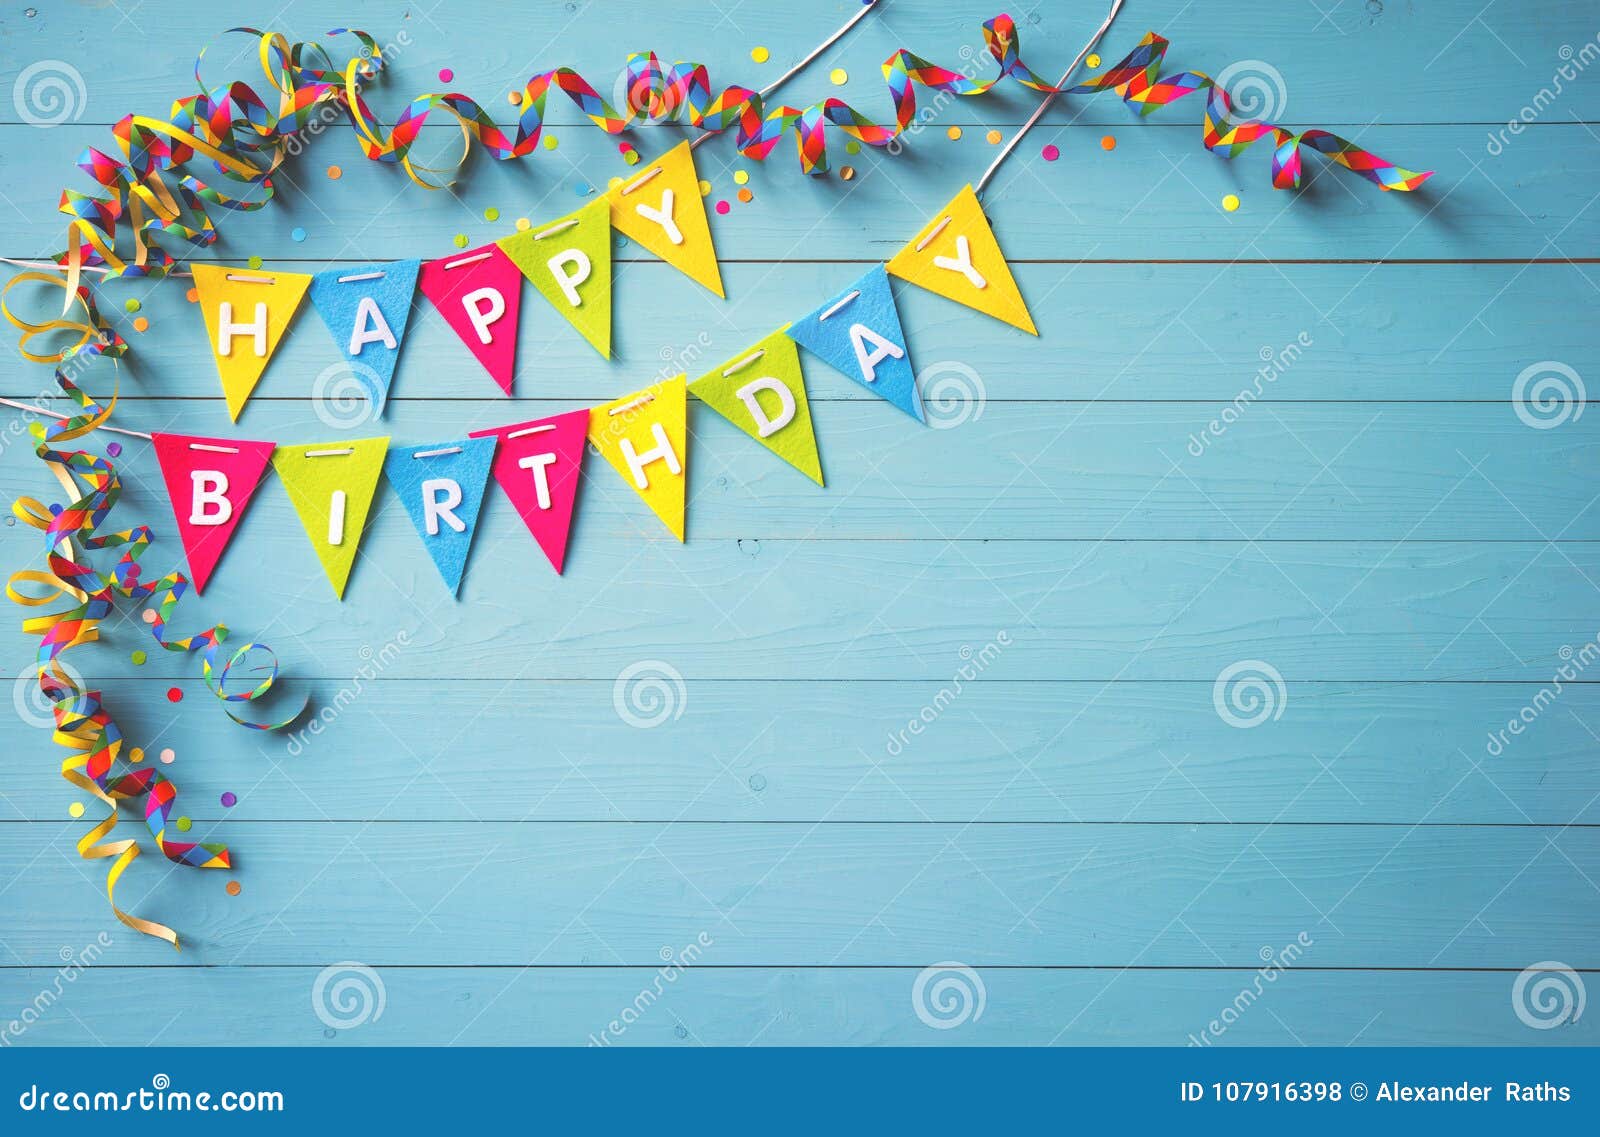 Happy Birthday Party Background with Text and Colorful Tools Stock ...